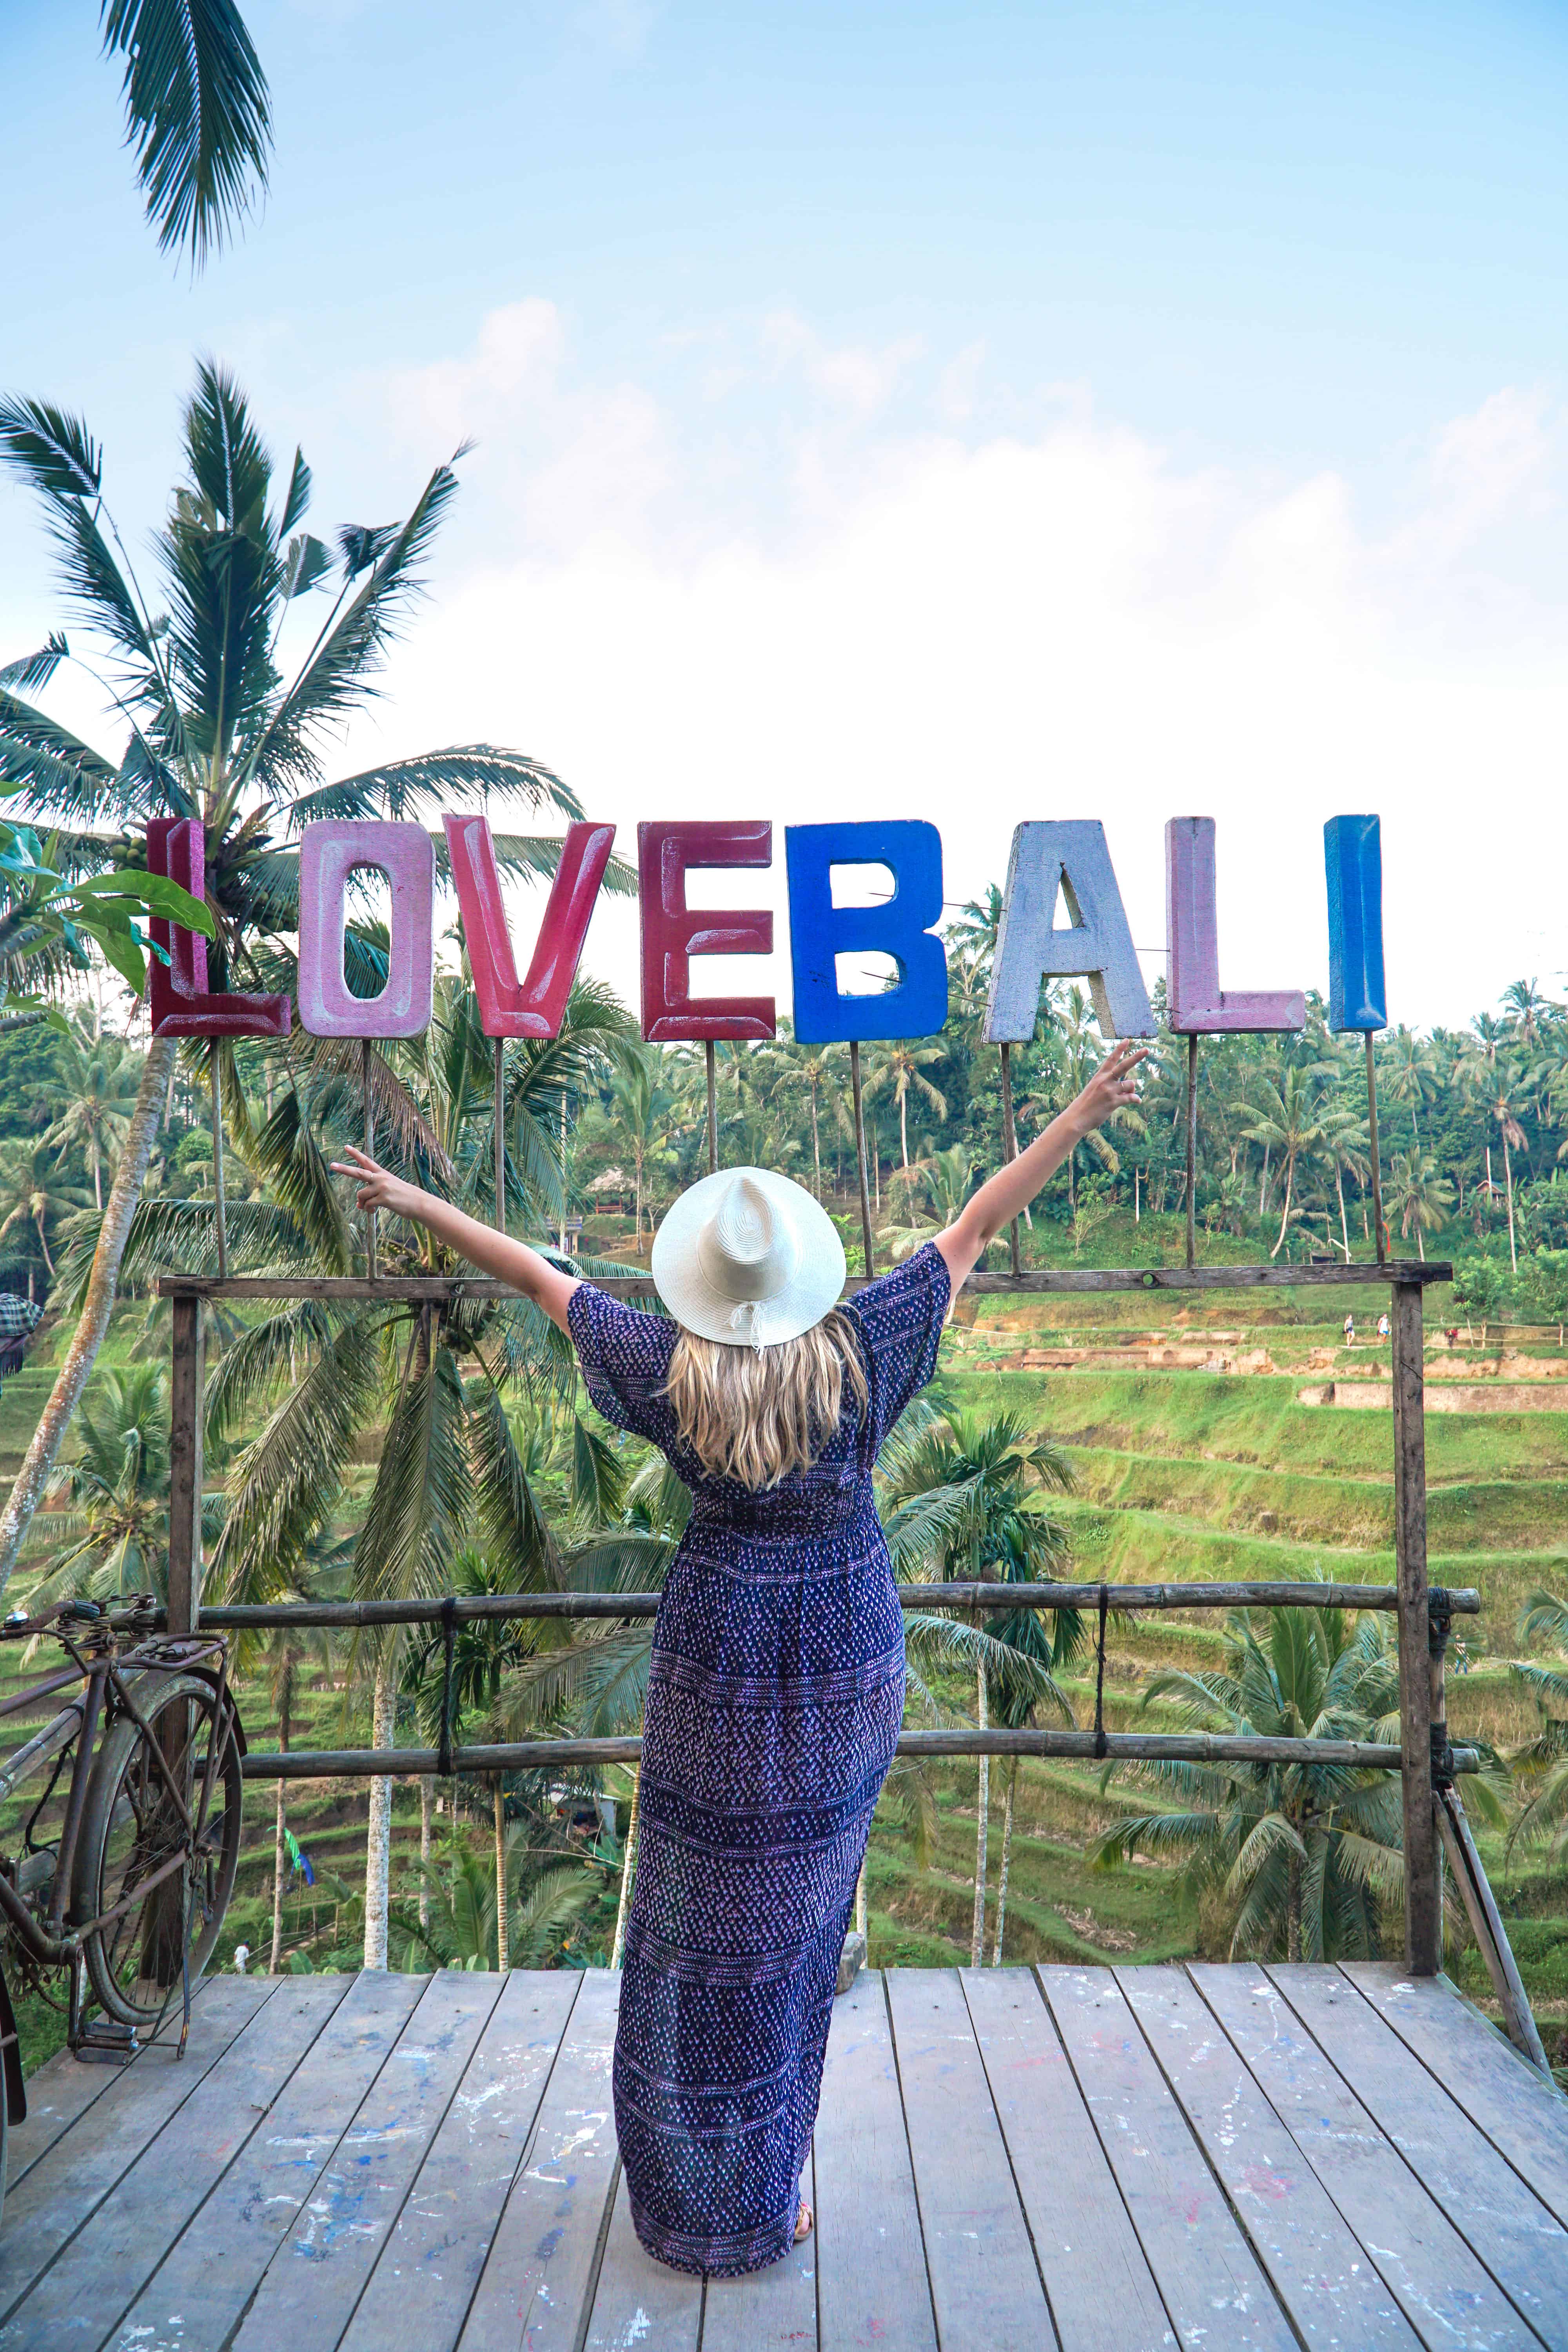 Ubud Tegalalang Rice Terrace | Amazing Photos to Inspire You to Visit Bali | The Republic of Rose